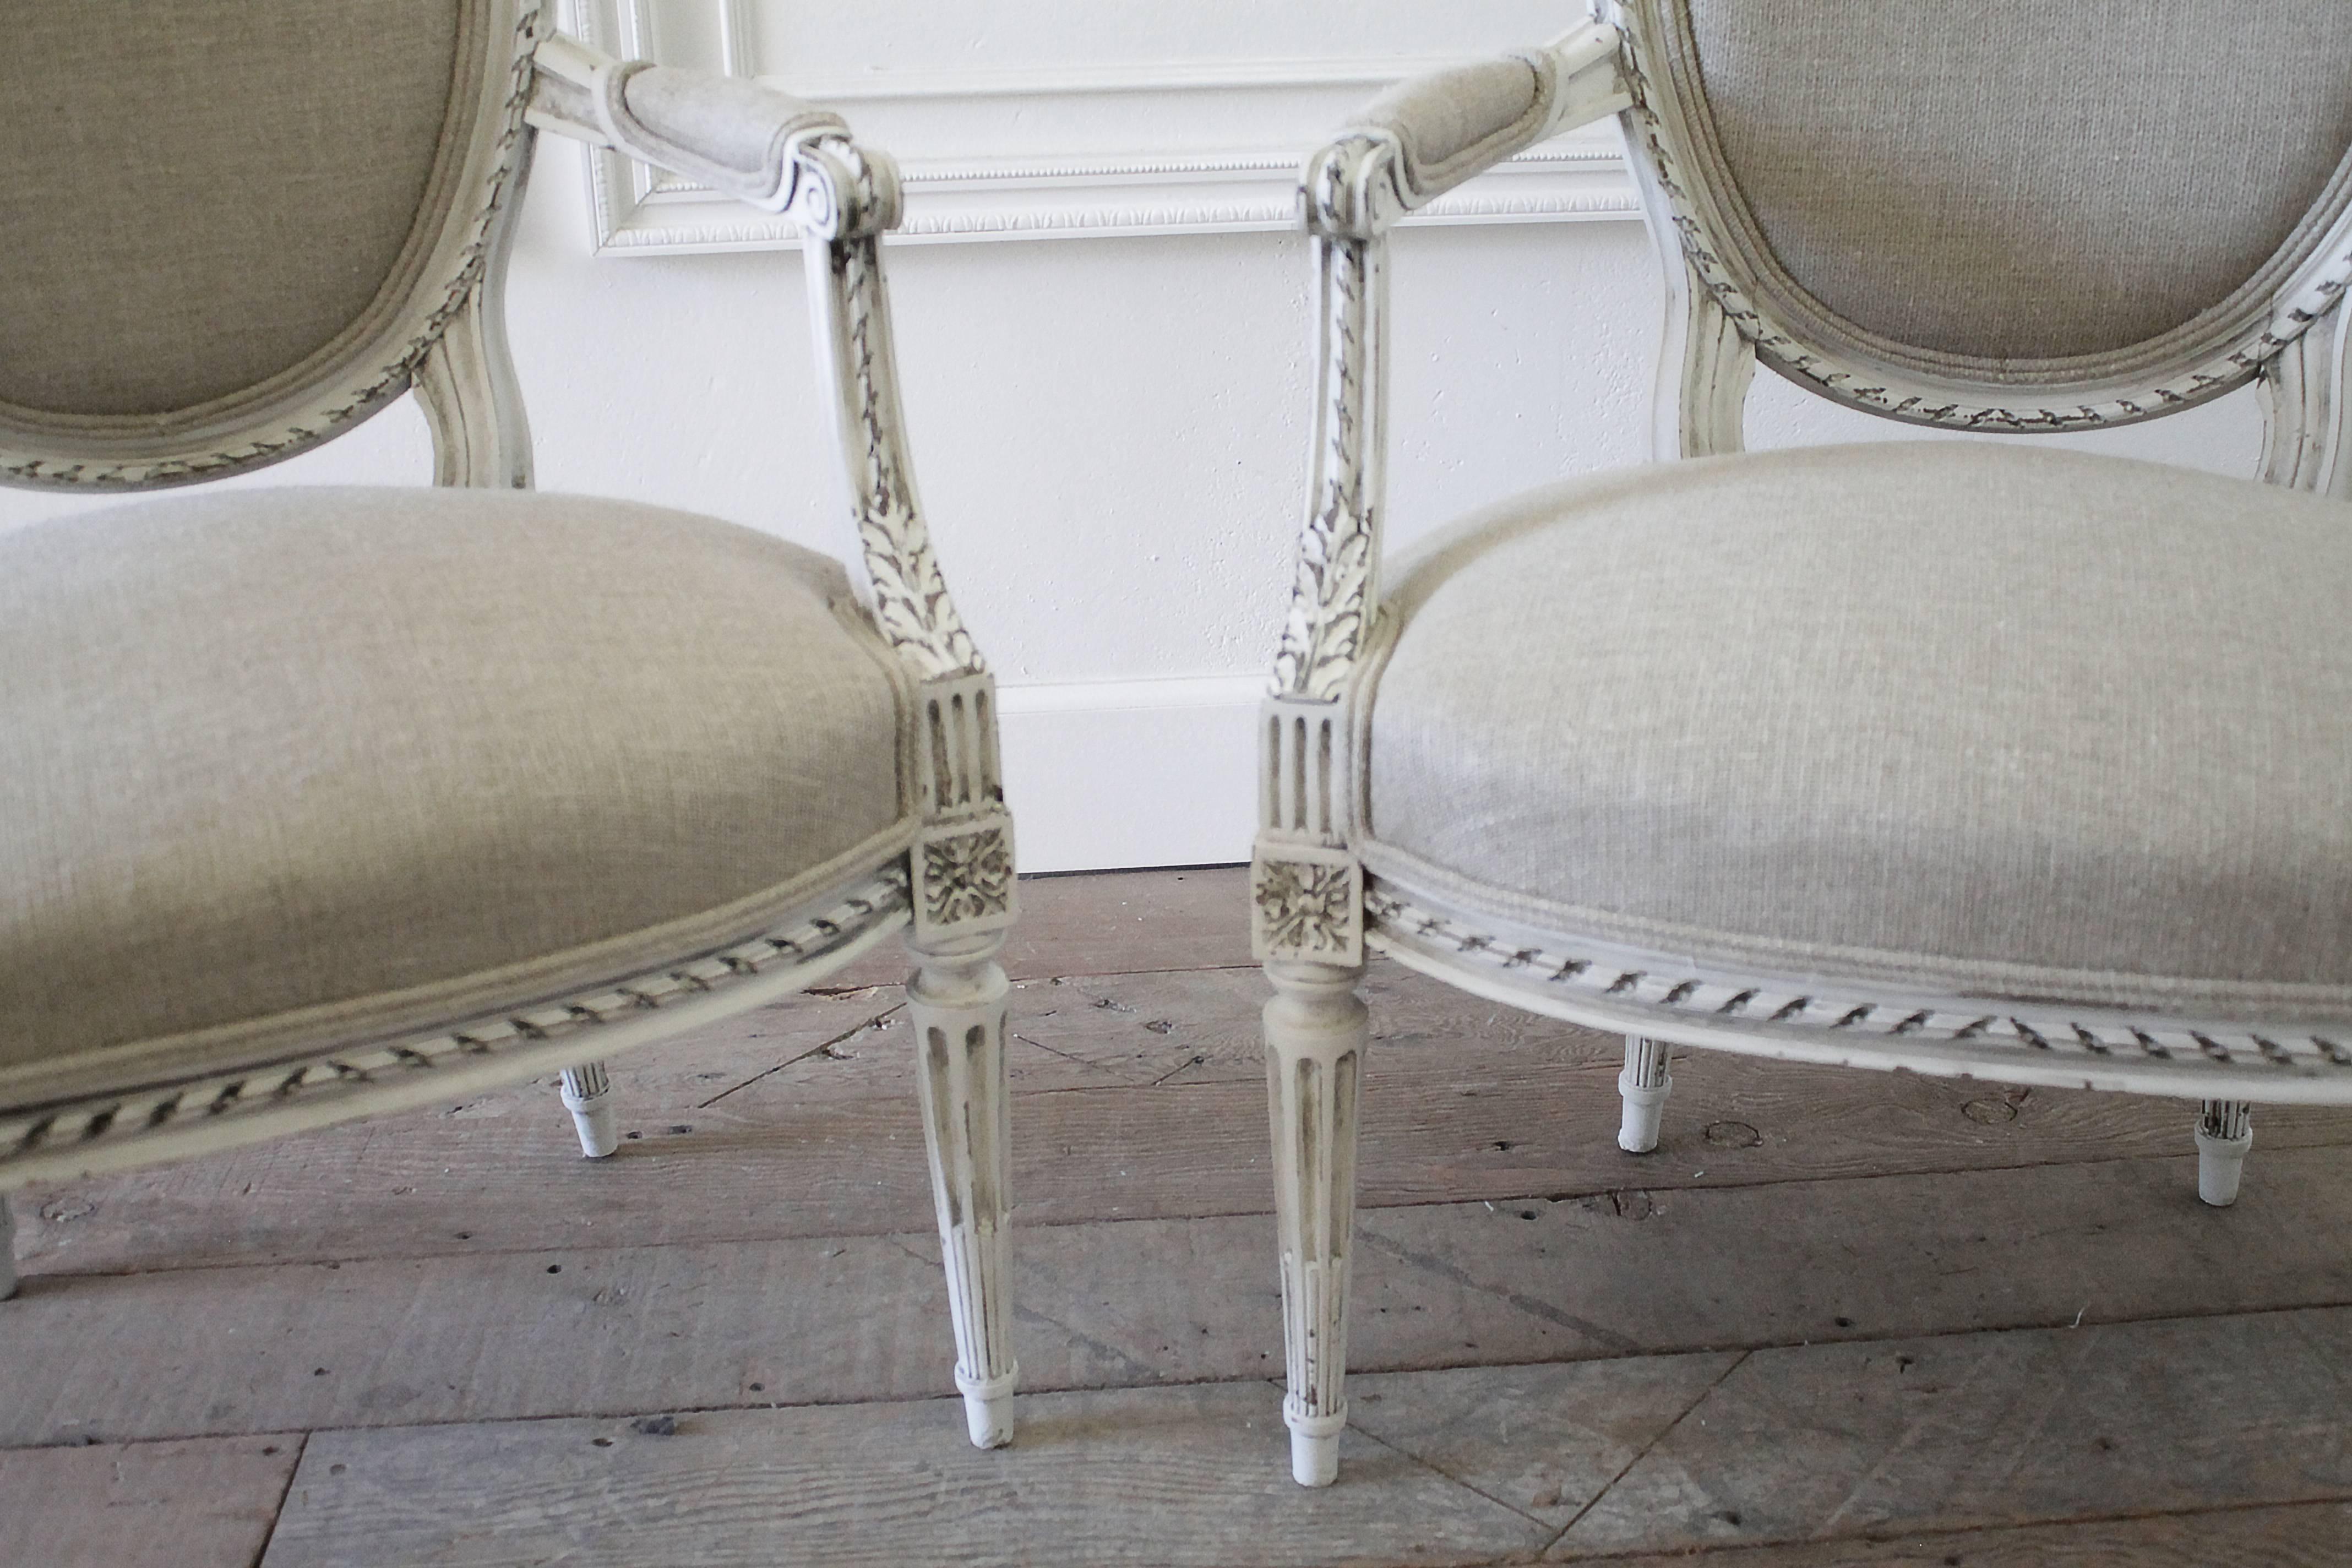 Fabulous pair of Louis XVI armchairs have our oyster white painted finish, hand distressed with antique glazed finish to give the look of a time worn patina. These lovely set of armchairs match a settee and pair of side chairs (listed